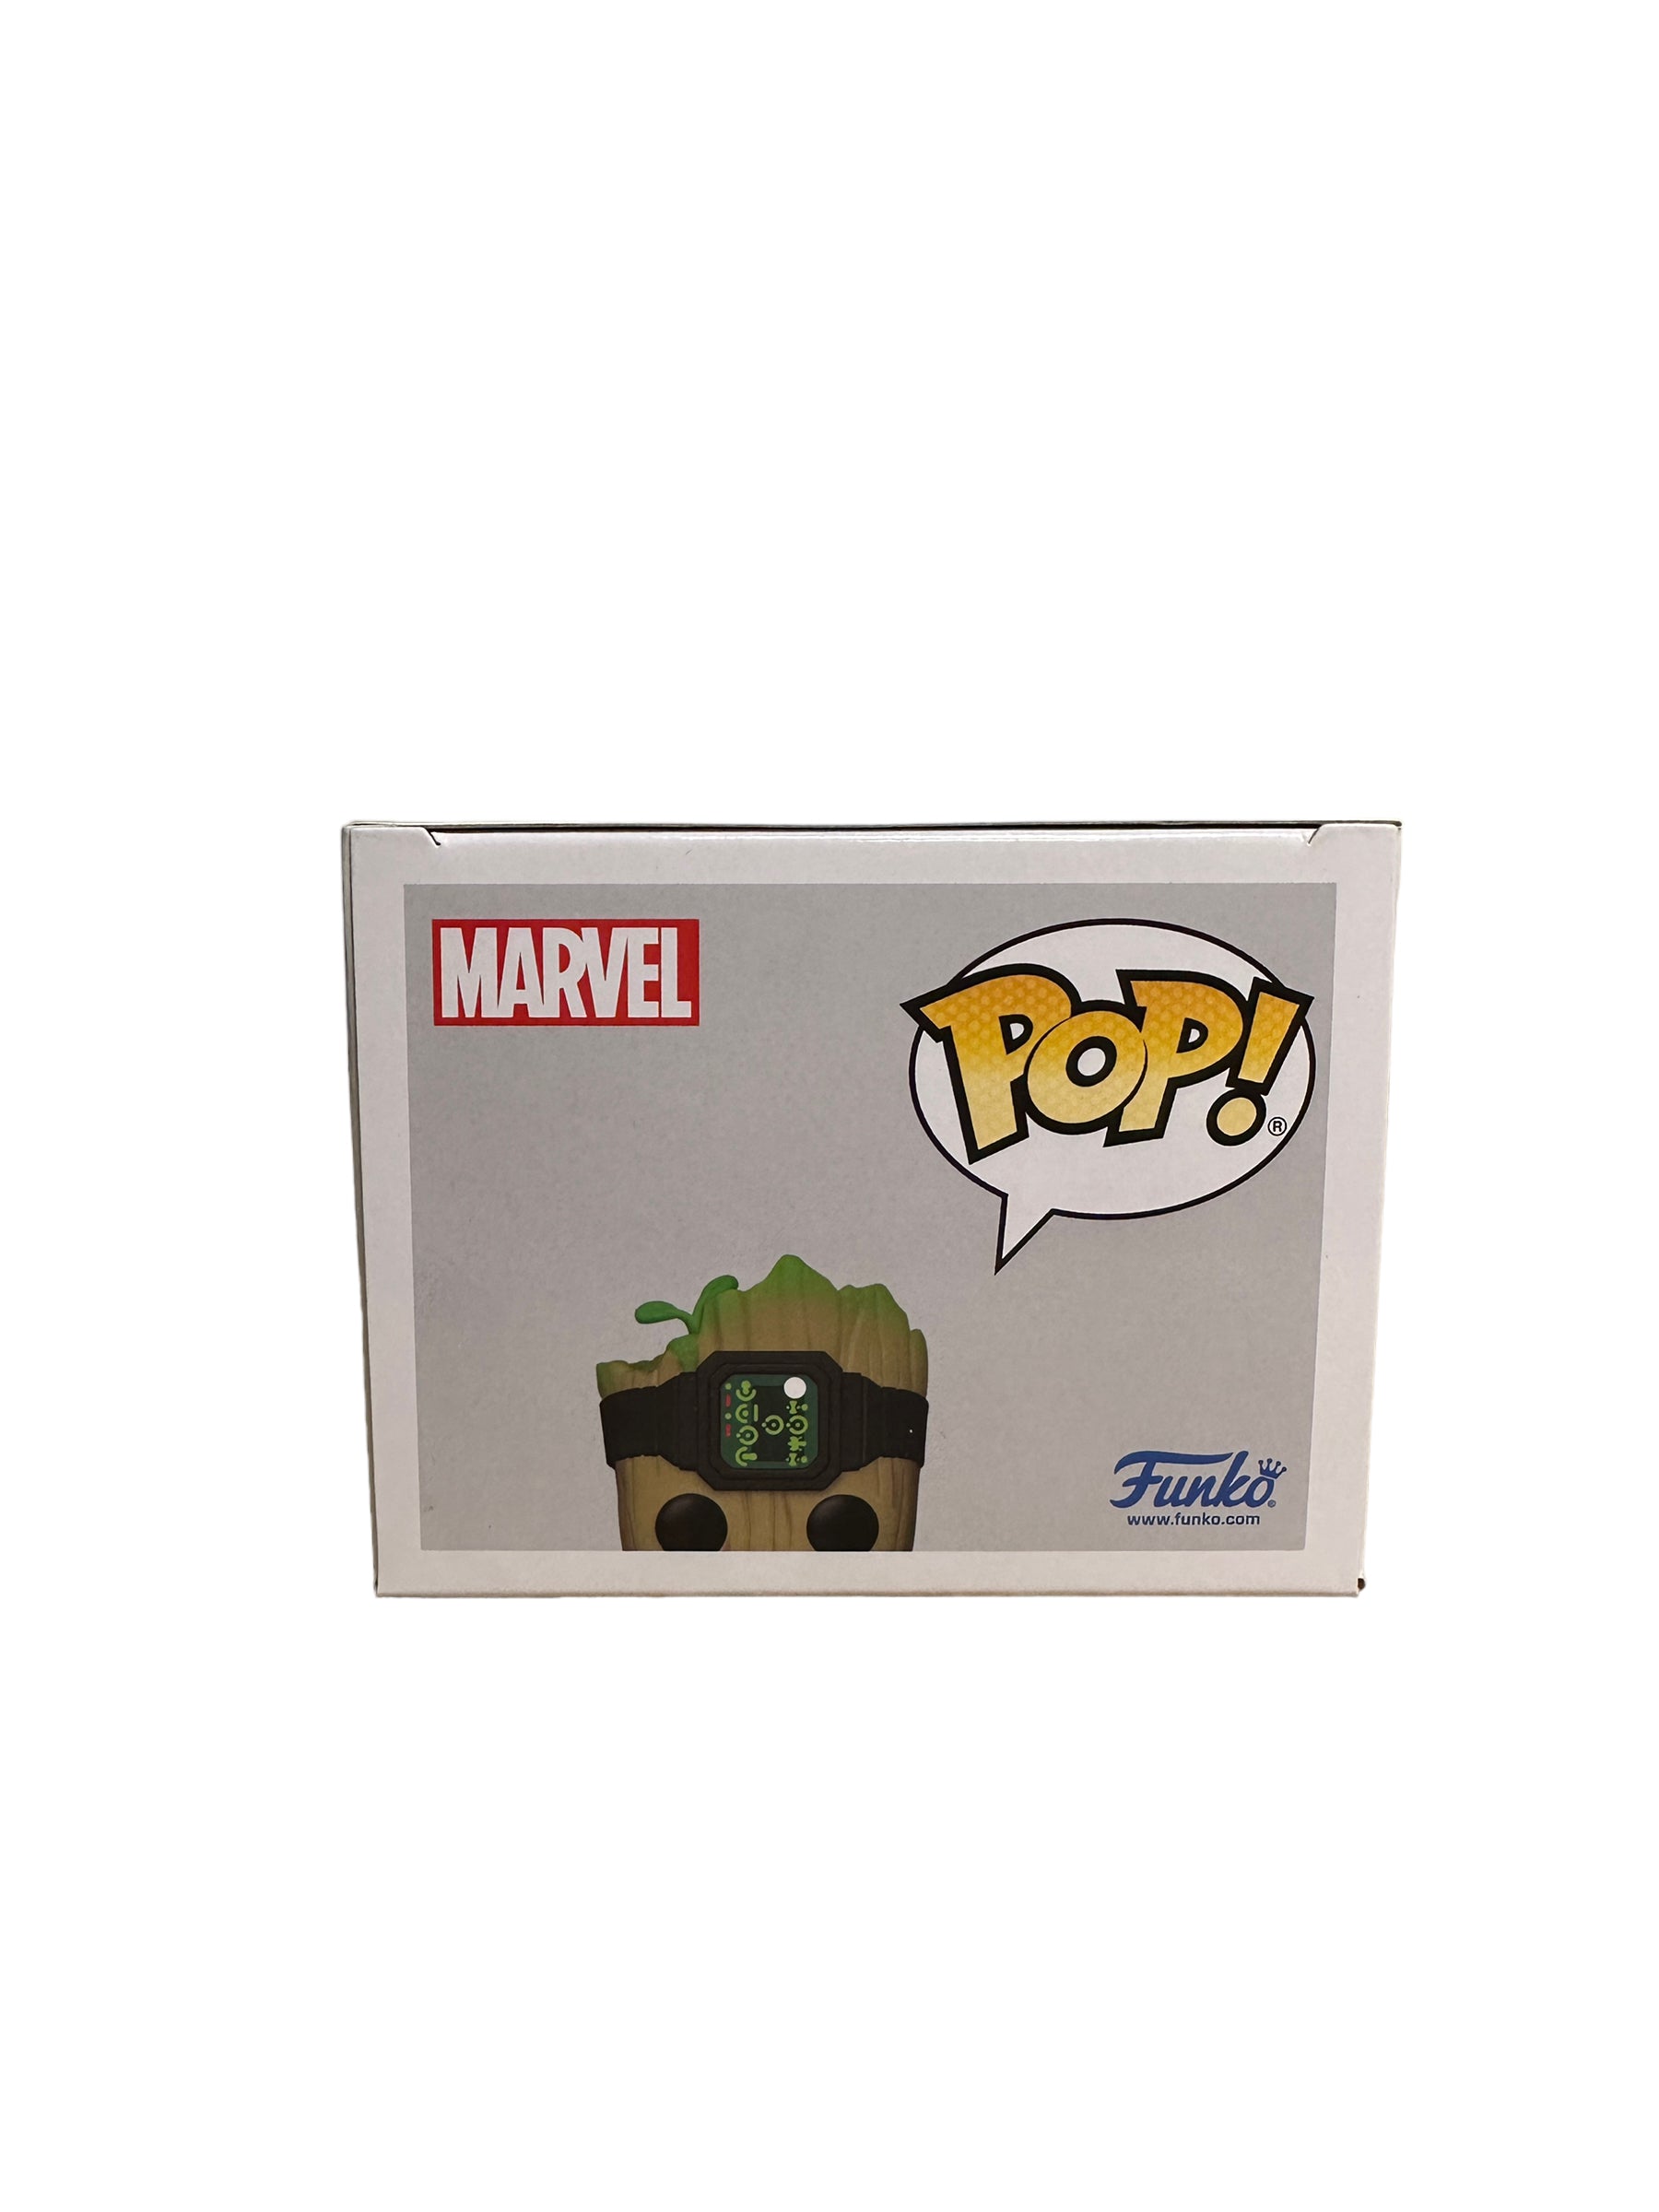 Groot #1116 (w/ Light) Funko Pop! - I Am Groot - NYCC 2022 Official Convention Exclusive - Condition 9.5/10